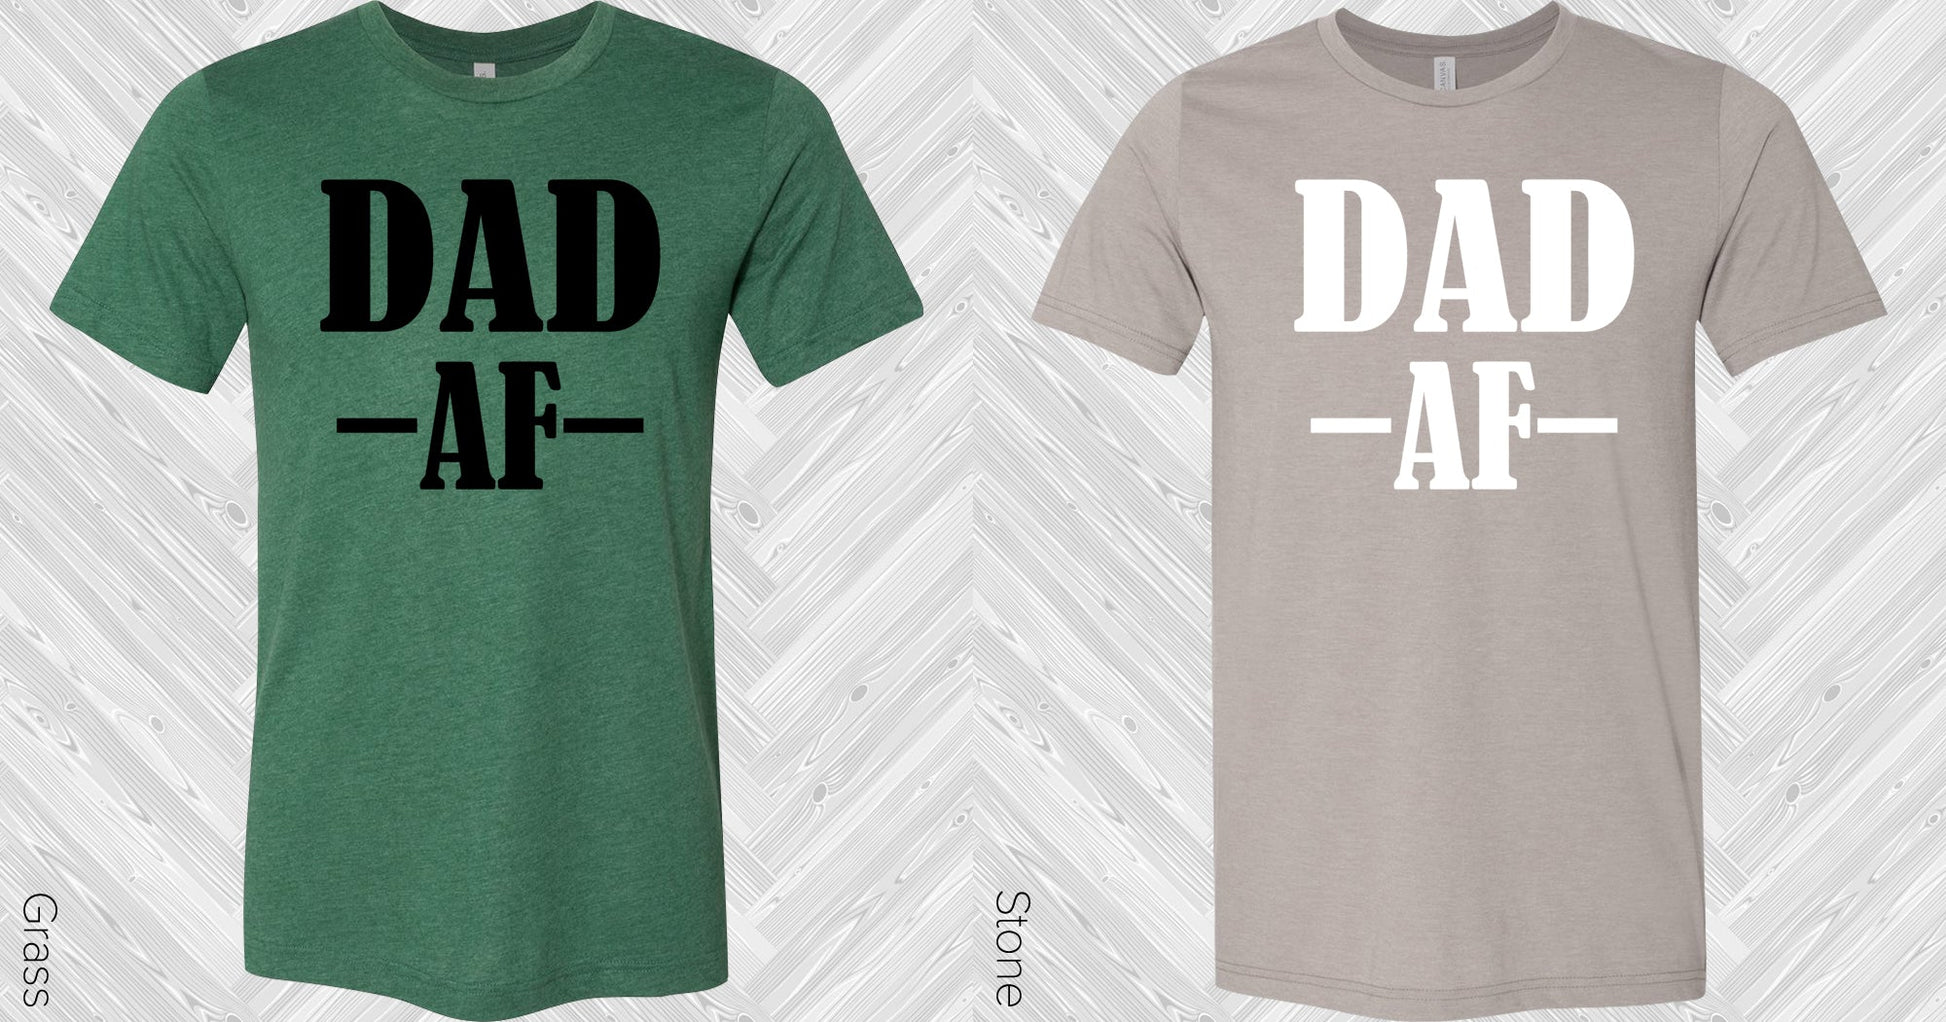 Dad Af Graphic Tee Graphic Tee